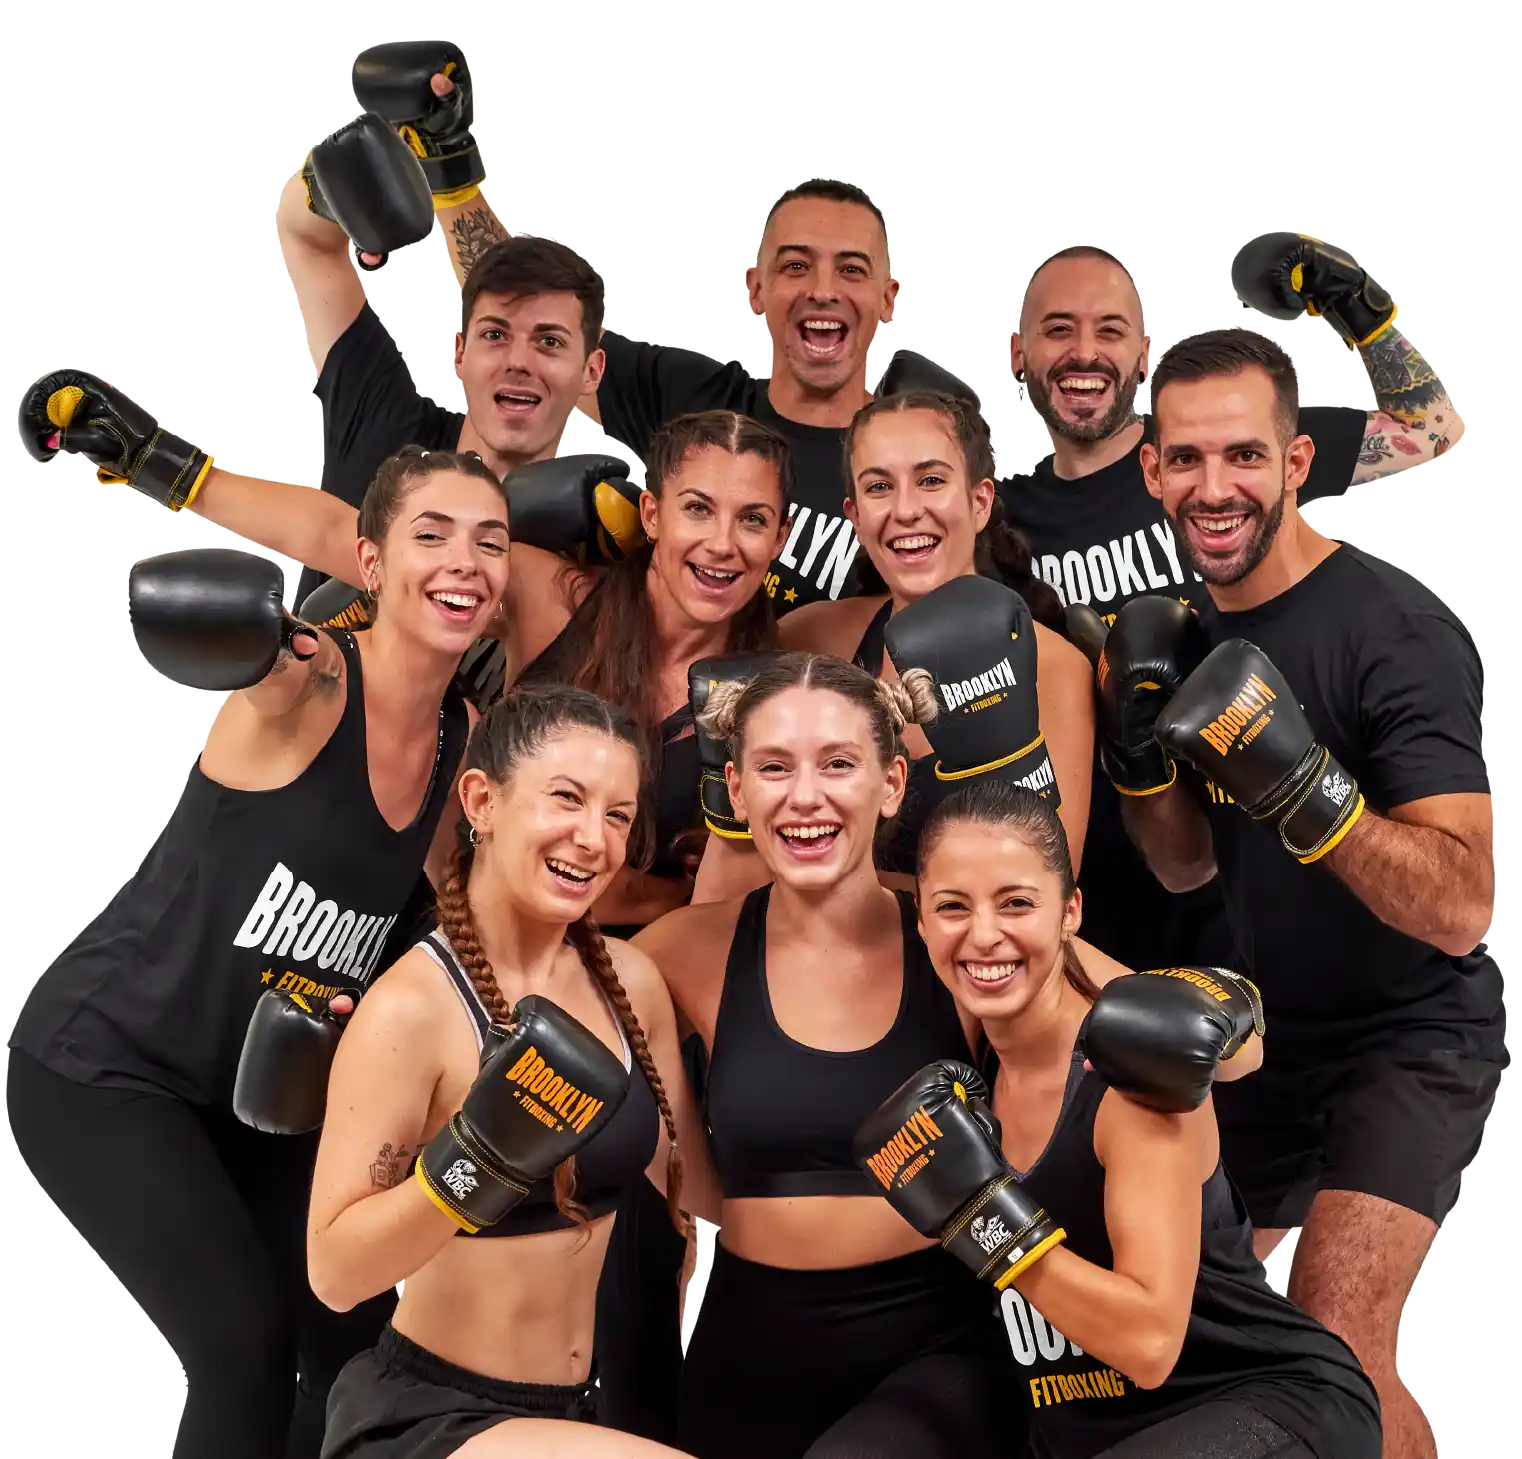 A group of fitboxers pose happily in formation